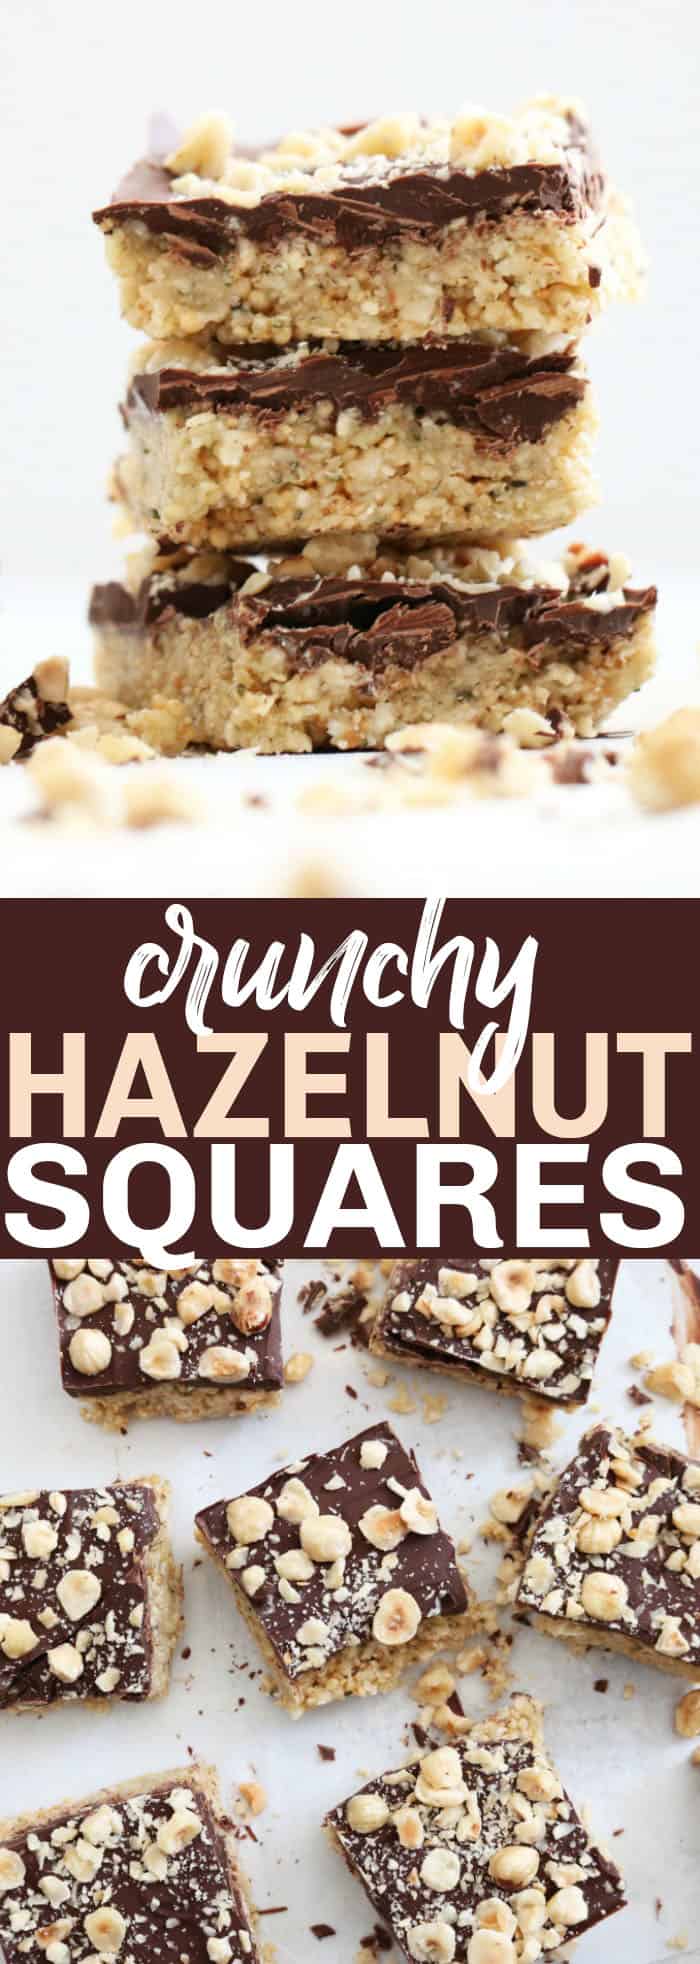 I am OBSESSED with these No-Bake Hazelnut Bars! They're gluten free, vegan and completely delish! You can never go wrong with crunchy hazelnut + chocolate! thetoastedpinenut.com #glutenfree #vegan #nobake #dessert